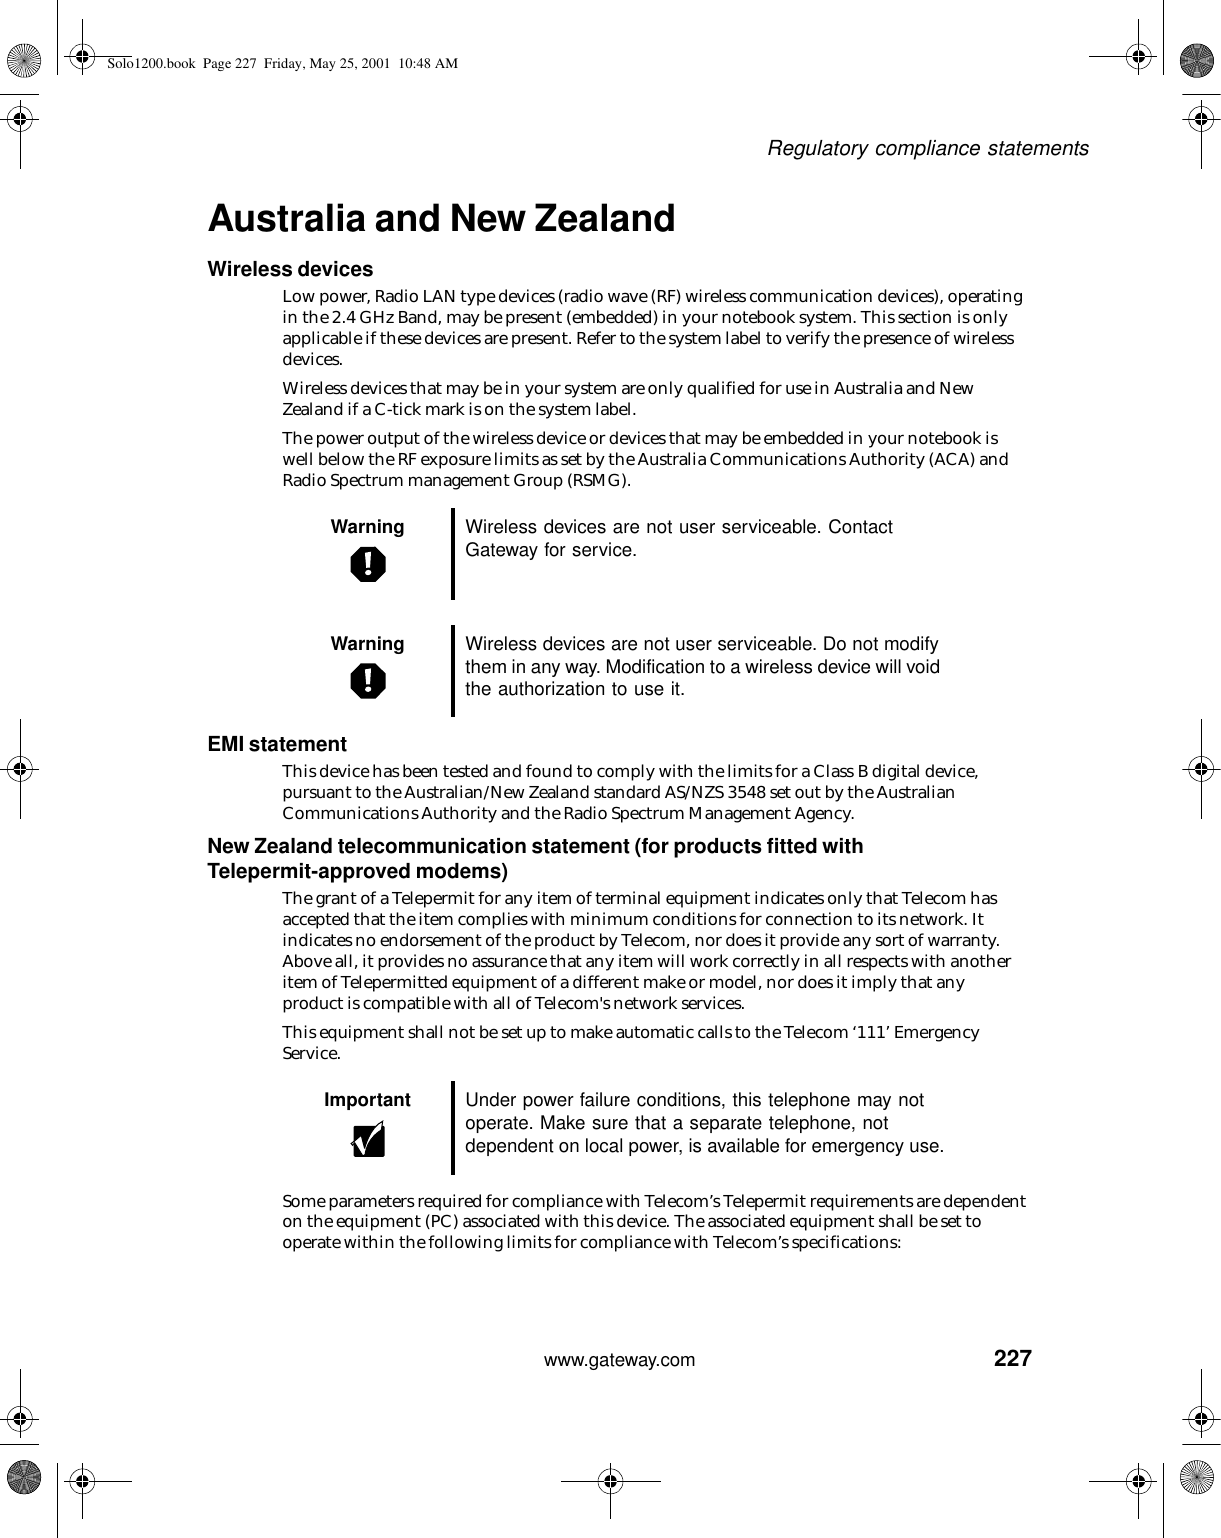 227Regulatory compliance statementswww.gateway.comAustralia and New ZealandWireless devicesLow power, Radio LAN type devices (radio wave (RF) wireless communication devices), operating in the 2.4 GHz Band, may be present (embedded) in your notebook system. This section is only applicable if these devices are present. Refer to the system label to verify the presence of wireless devices.Wireless devices that may be in your system are only qualified for use in Australia and New Zealand if a C-tick mark is on the system label.The power output of the wireless device or devices that may be embedded in your notebook is well below the RF exposure limits as set by the Australia Communications Authority (ACA) and Radio Spectrum management Group (RSMG).EMI statementThis device has been tested and found to comply with the limits for a Class B digital device, pursuant to the Australian/New Zealand standard AS/NZS 3548 set out by the Australian Communications Authority and the Radio Spectrum Management Agency.New Zealand telecommunication statement (for products fitted with Telepermit-approved modems)The grant of a Telepermit for any item of terminal equipment indicates only that Telecom has accepted that the item complies with minimum conditions for connection to its network. It indicates no endorsement of the product by Telecom, nor does it provide any sort of warranty. Above all, it provides no assurance that any item will work correctly in all respects with another item of Telepermitted equipment of a different make or model, nor does it imply that any product is compatible with all of Telecom&apos;s network services.This equipment shall not be set up to make automatic calls to the Telecom ‘111’ Emergency Service.Some parameters required for compliance with Telecom’s Telepermit requirements are dependent on the equipment (PC) associated with this device. The associated equipment shall be set to operate within the following limits for compliance with Telecom’s specifications:Warning Wireless devices are not user serviceable. Contact Gateway for service.Warning Wireless devices are not user serviceable. Do not modify them in any way. Modification to a wireless device will void the authorization to use it.Important Under power failure conditions, this telephone may not operate. Make sure that a separate telephone, not dependent on local power, is available for emergency use.Solo1200.book Page 227 Friday, May 25, 2001 10:48 AM